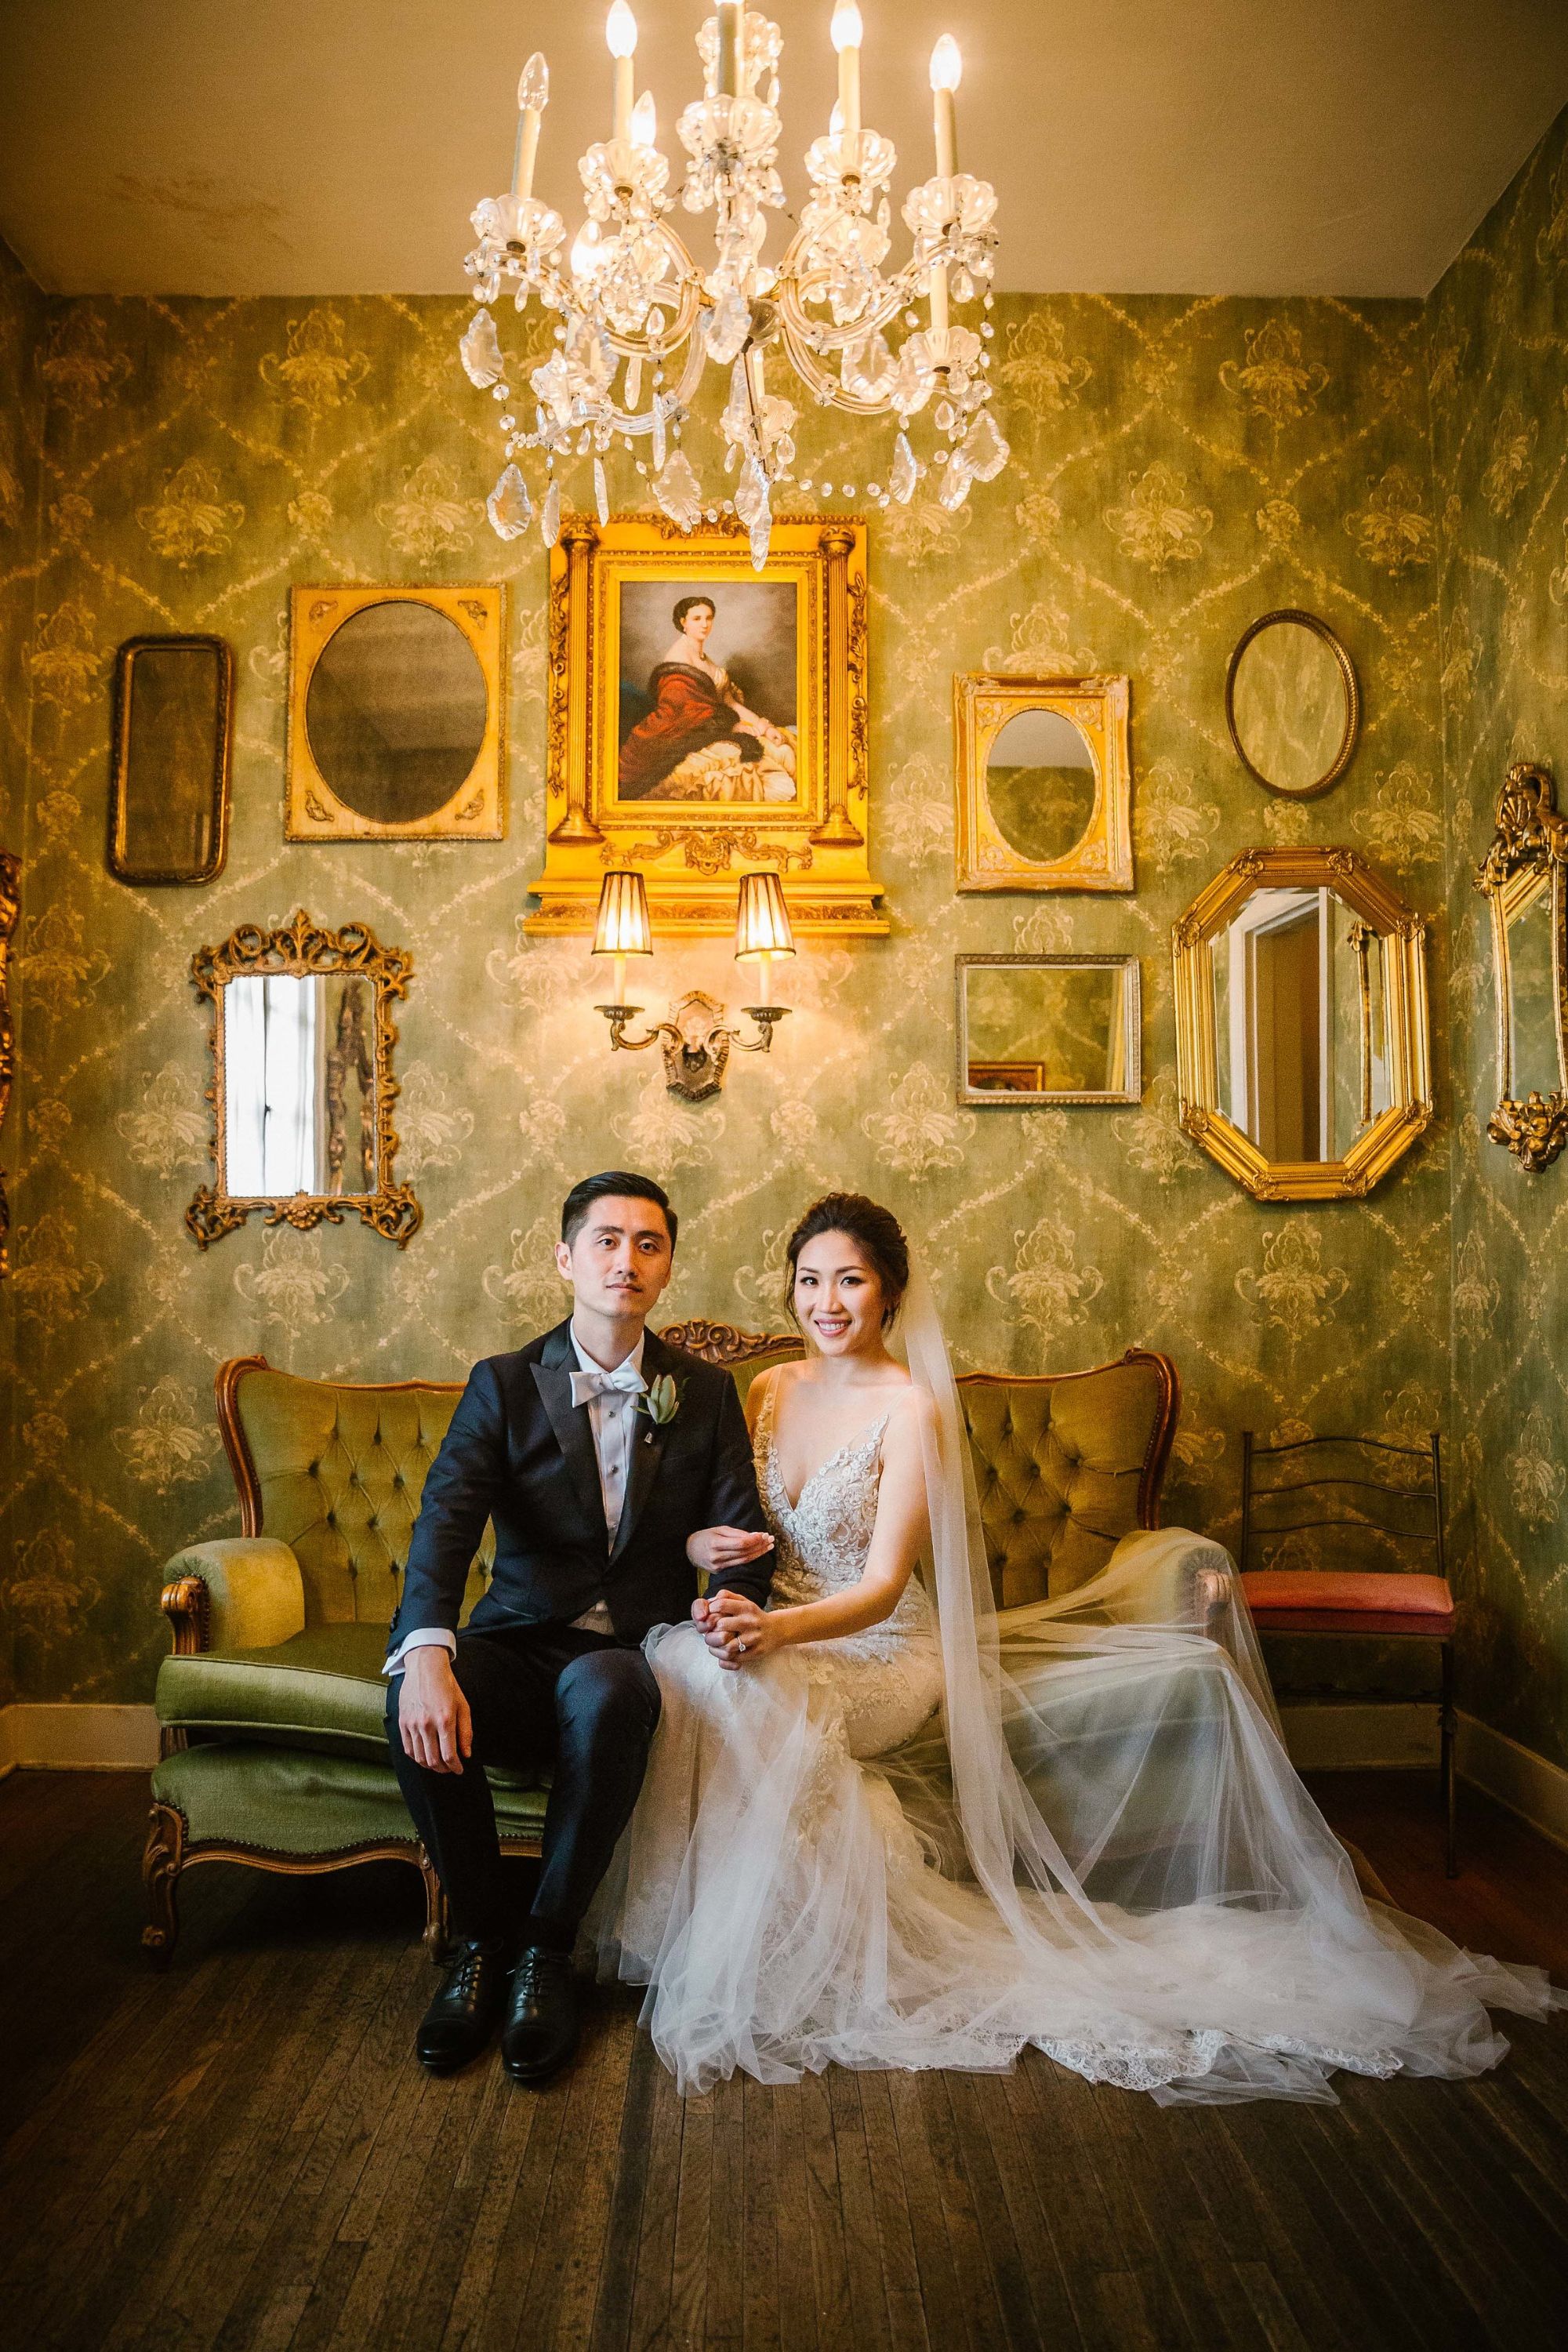 Bride and groom wedding portrait against backdrop of vintage mirrors.